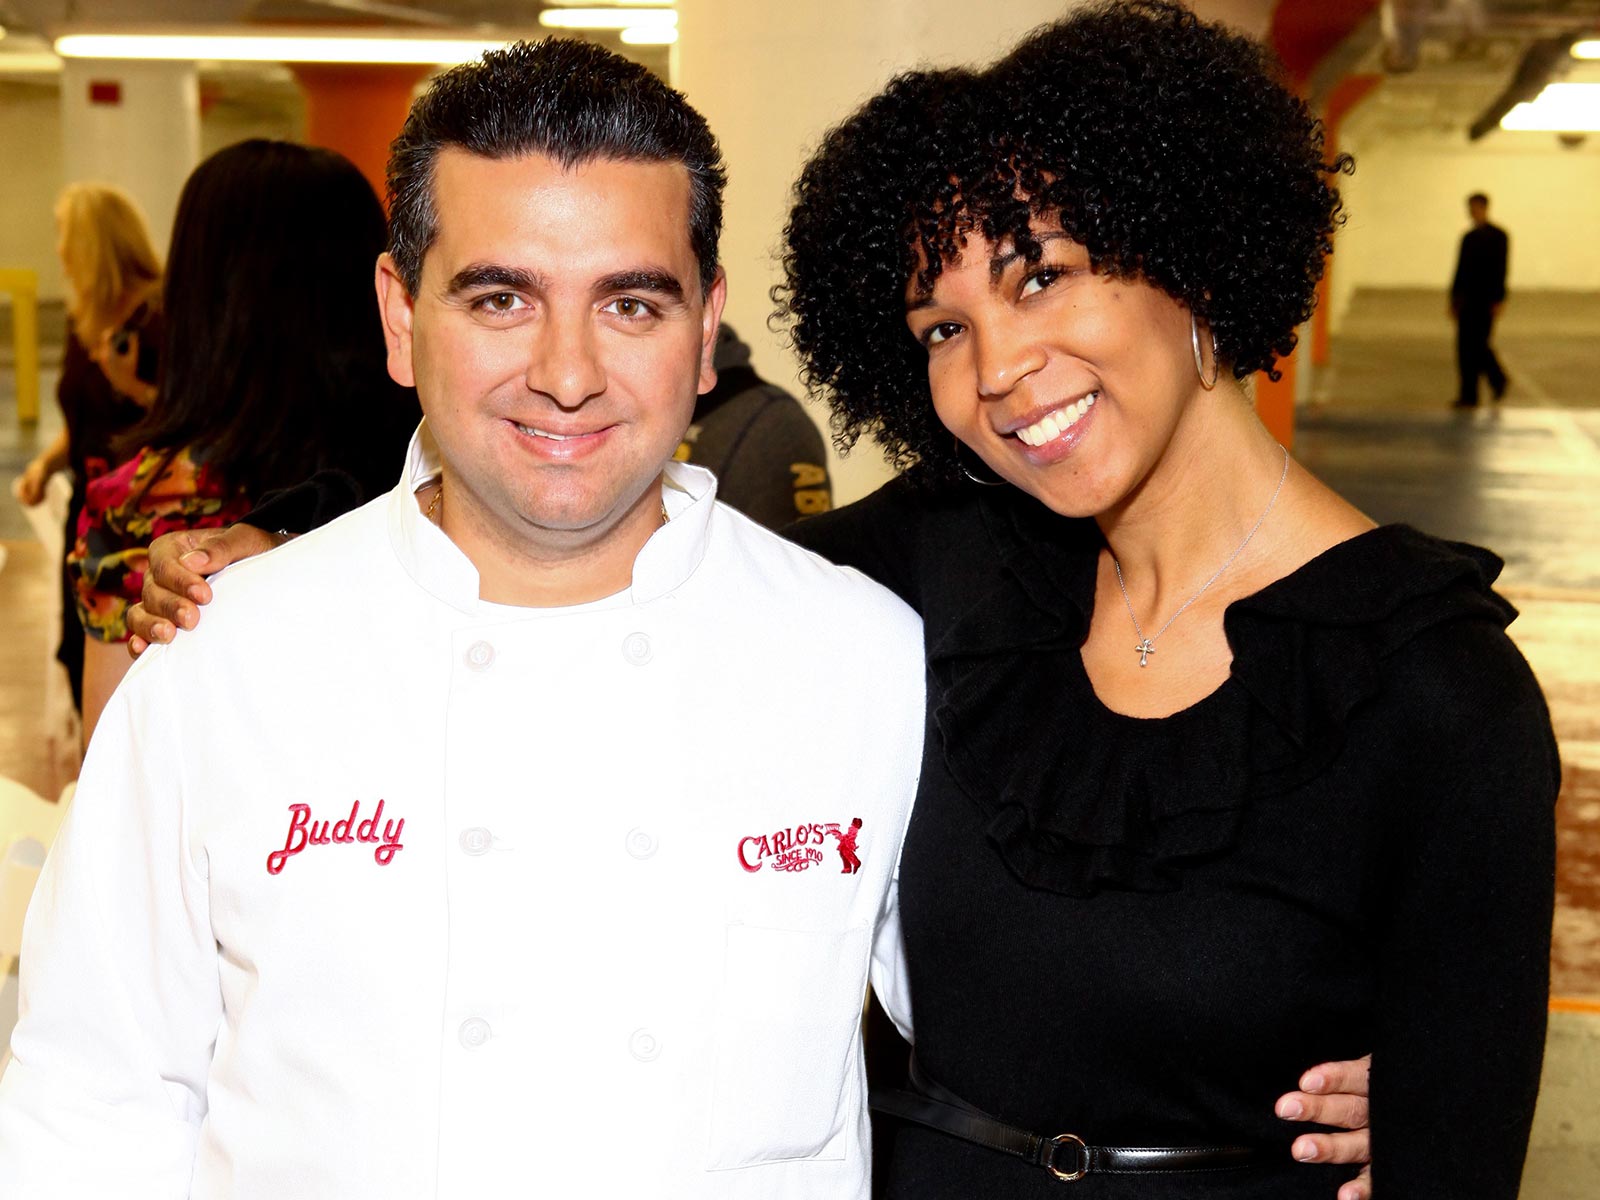 Tracey Hughes Royal and
Buddy “Cake Boss” Valastro
2010 Unveiling of Carlos Bakery, 
Lackawanna Center